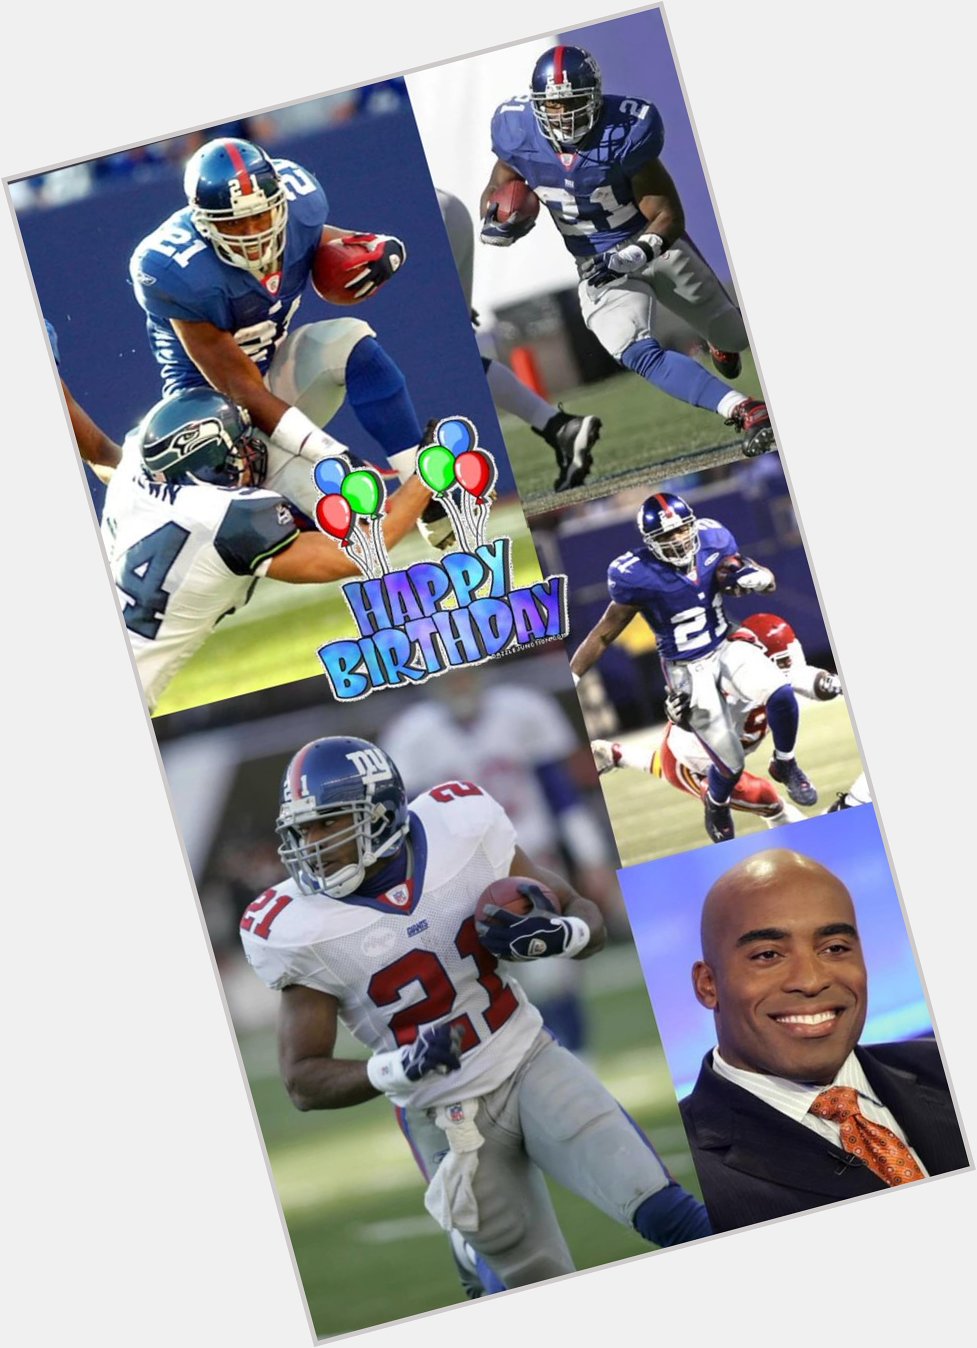 Happy Birthday to the great Tiki Barber!!! hope you enjoy your day bro!! 